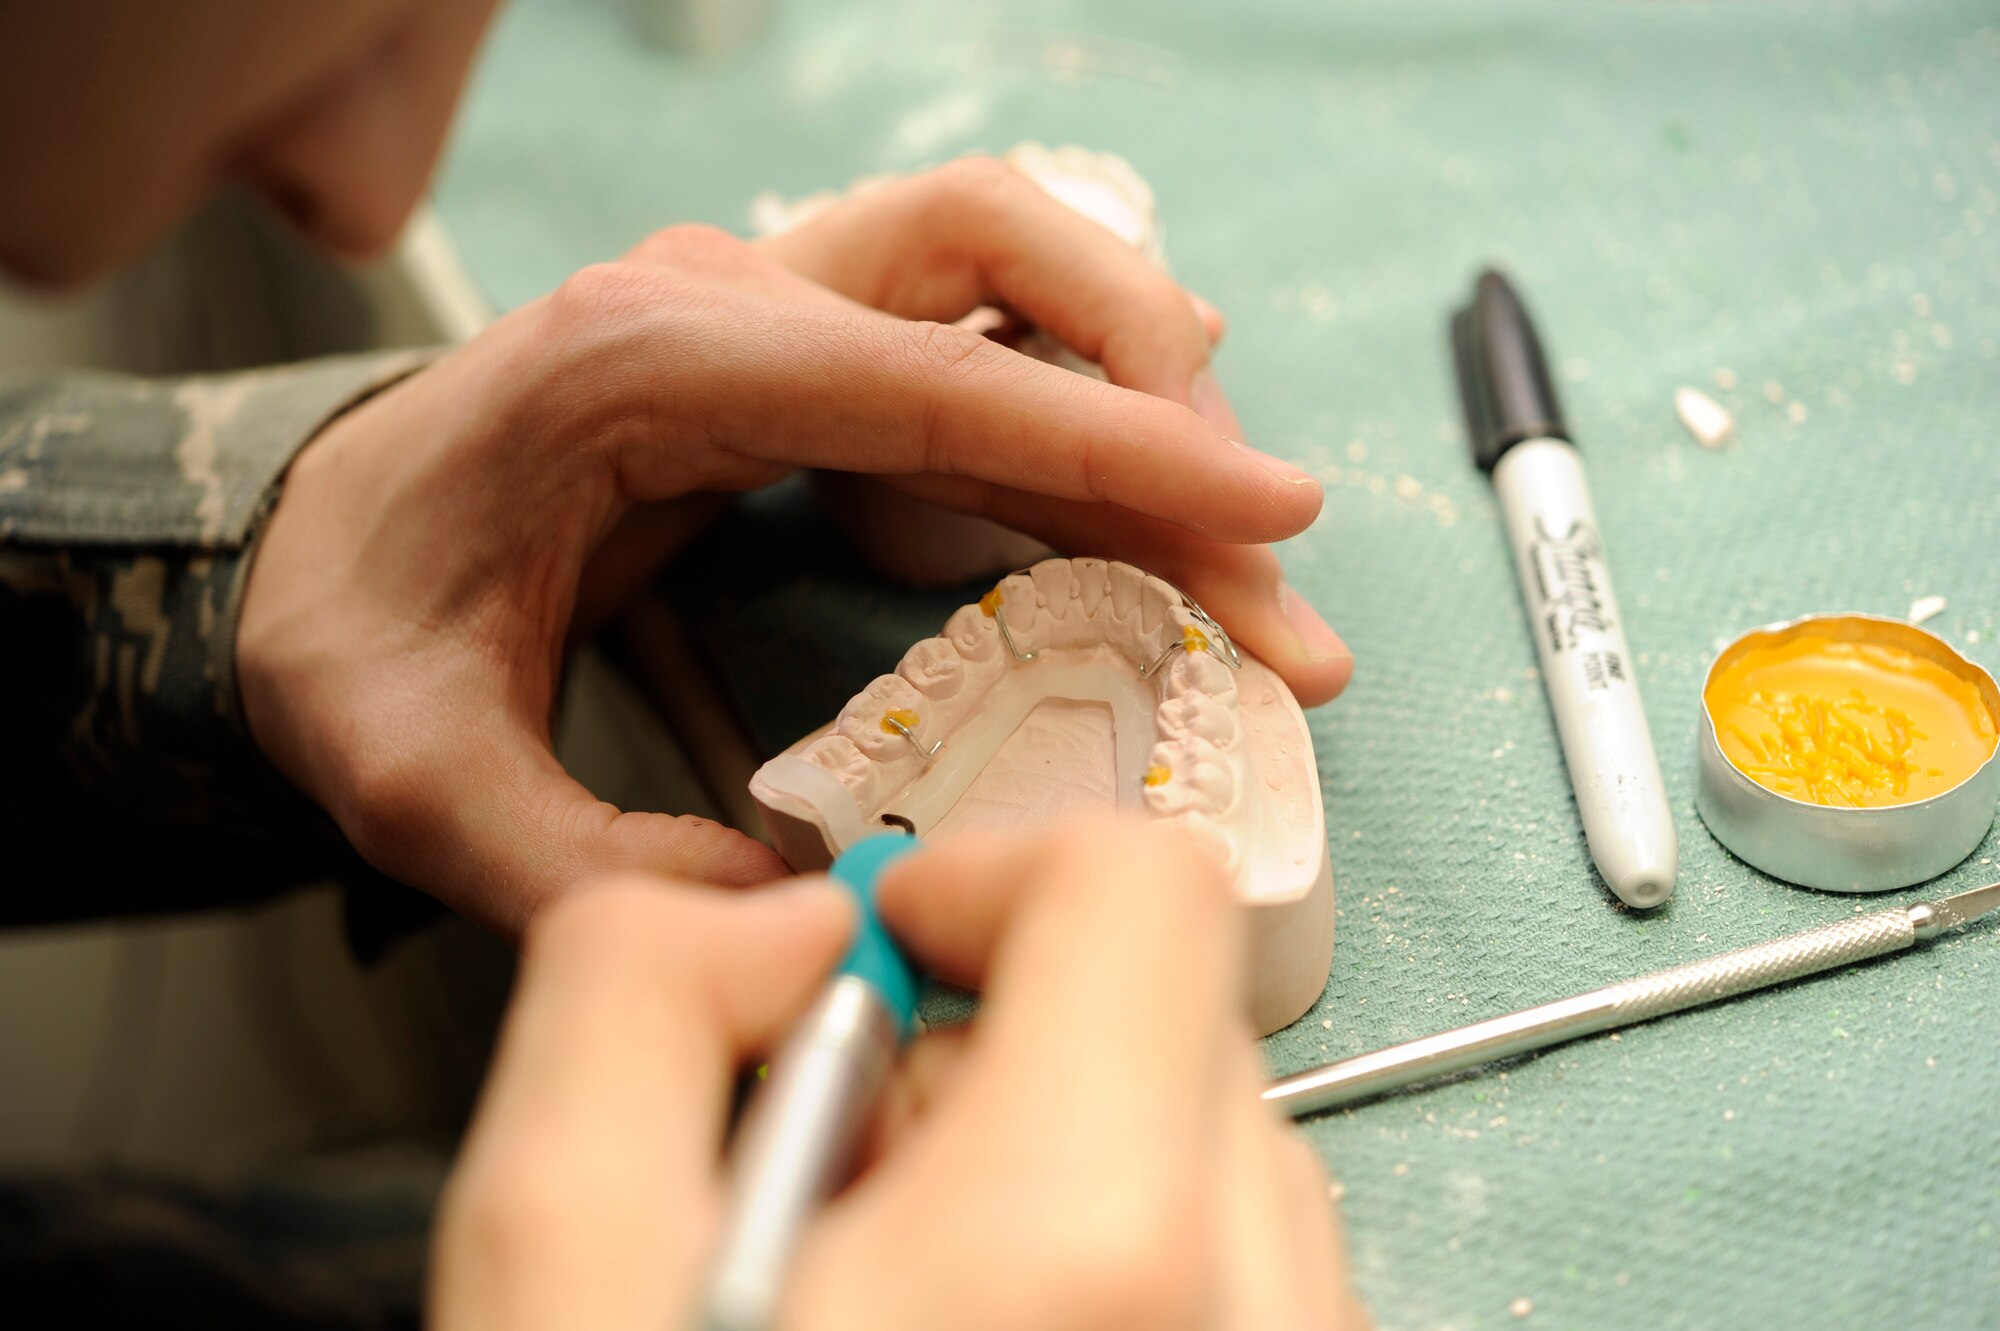 U.S. Air Force Staff Sgt. Dustin Nuss, 35th Dental Squadron dental lab technician, crafts a Hawley retainer at Misawa Air Base, Japan, Feb. 24, 2012. Dental lab technicians work on some dental aids that measure less than one millimeter in thickness. They must be precise in their work because the smallest mistake could cause a patient discomfort or pain. (U.S. Air Force photo by Airman 1st Class Kaleb Snay/Released)